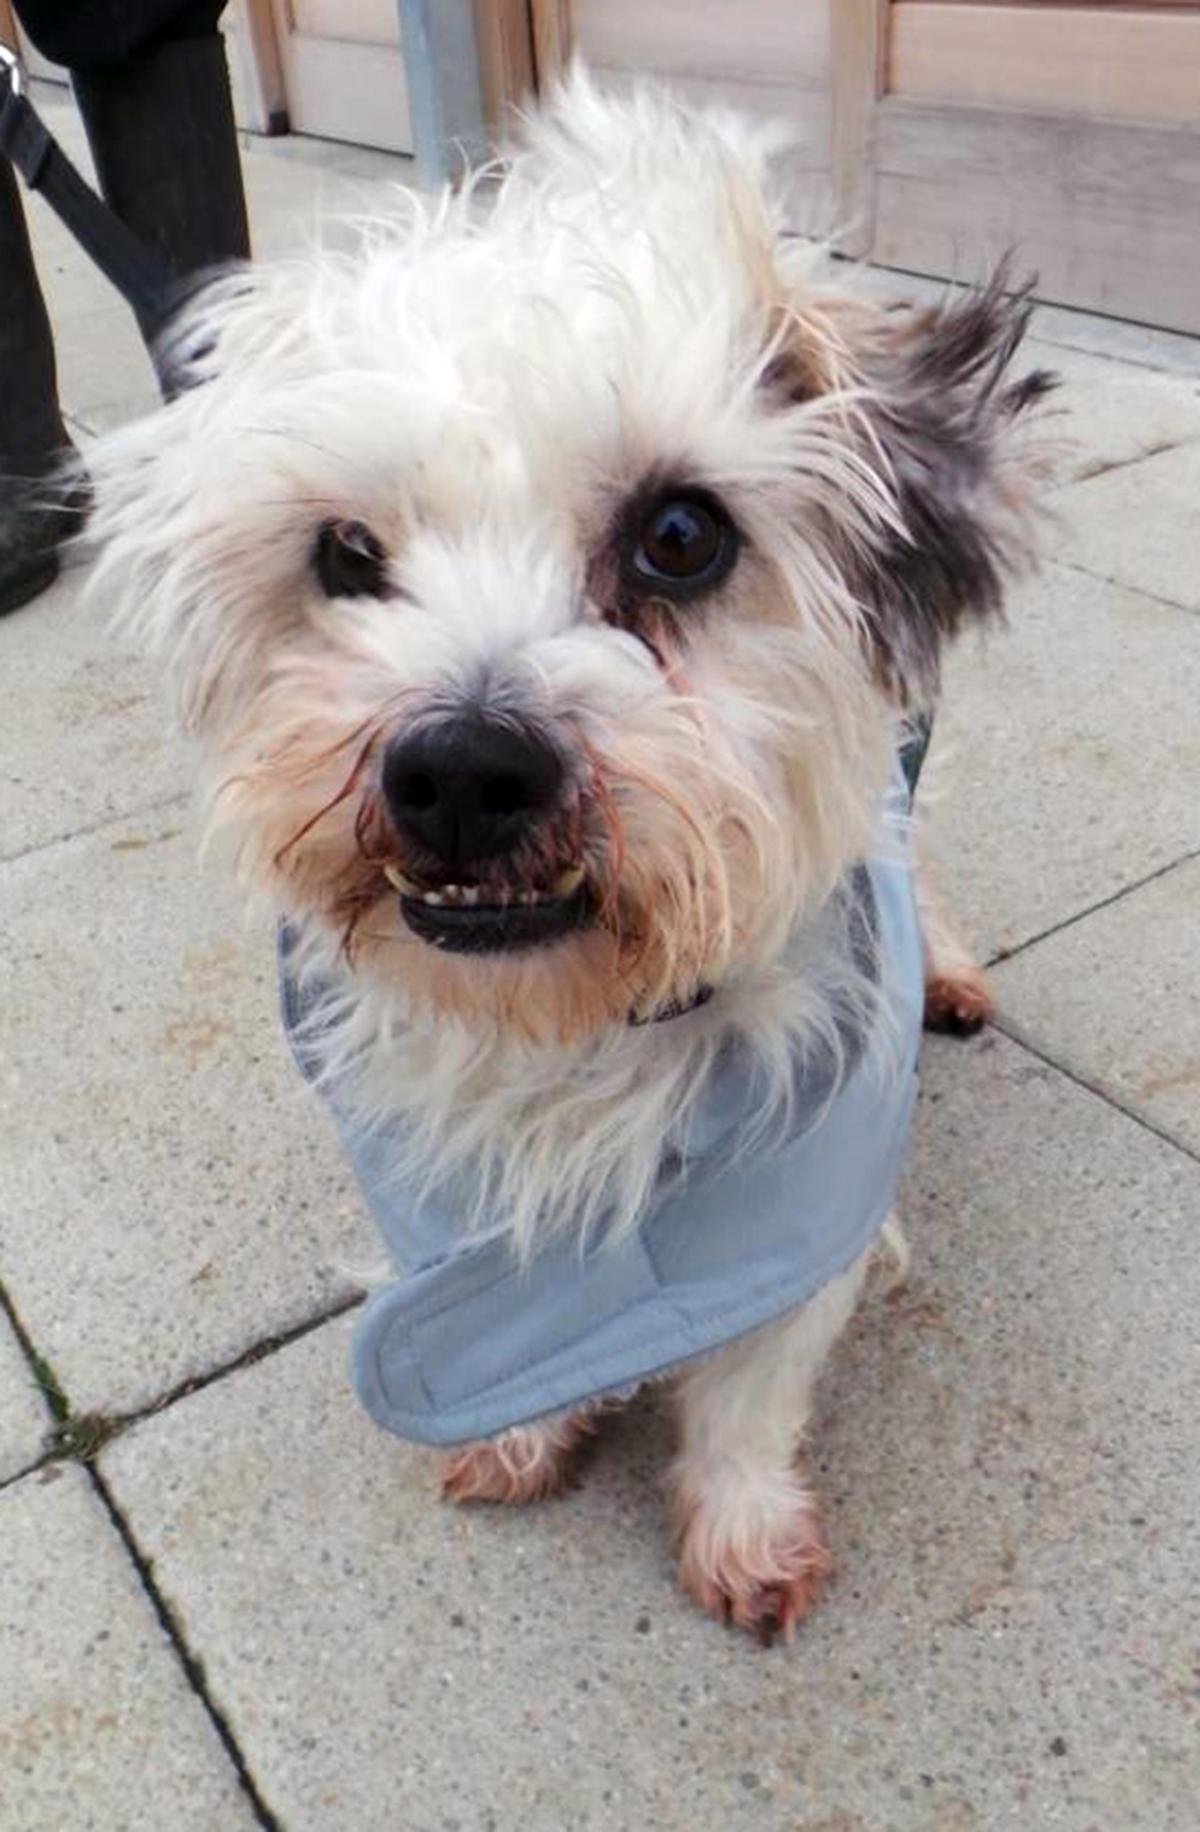 03/03/15
Dixie – Five year old male Shih Tzu cross
Dixie is an independent chap who isn’t typical of the breed. He is not a lap dog and he likes his own space.Dixie will be best suited to an adult only home